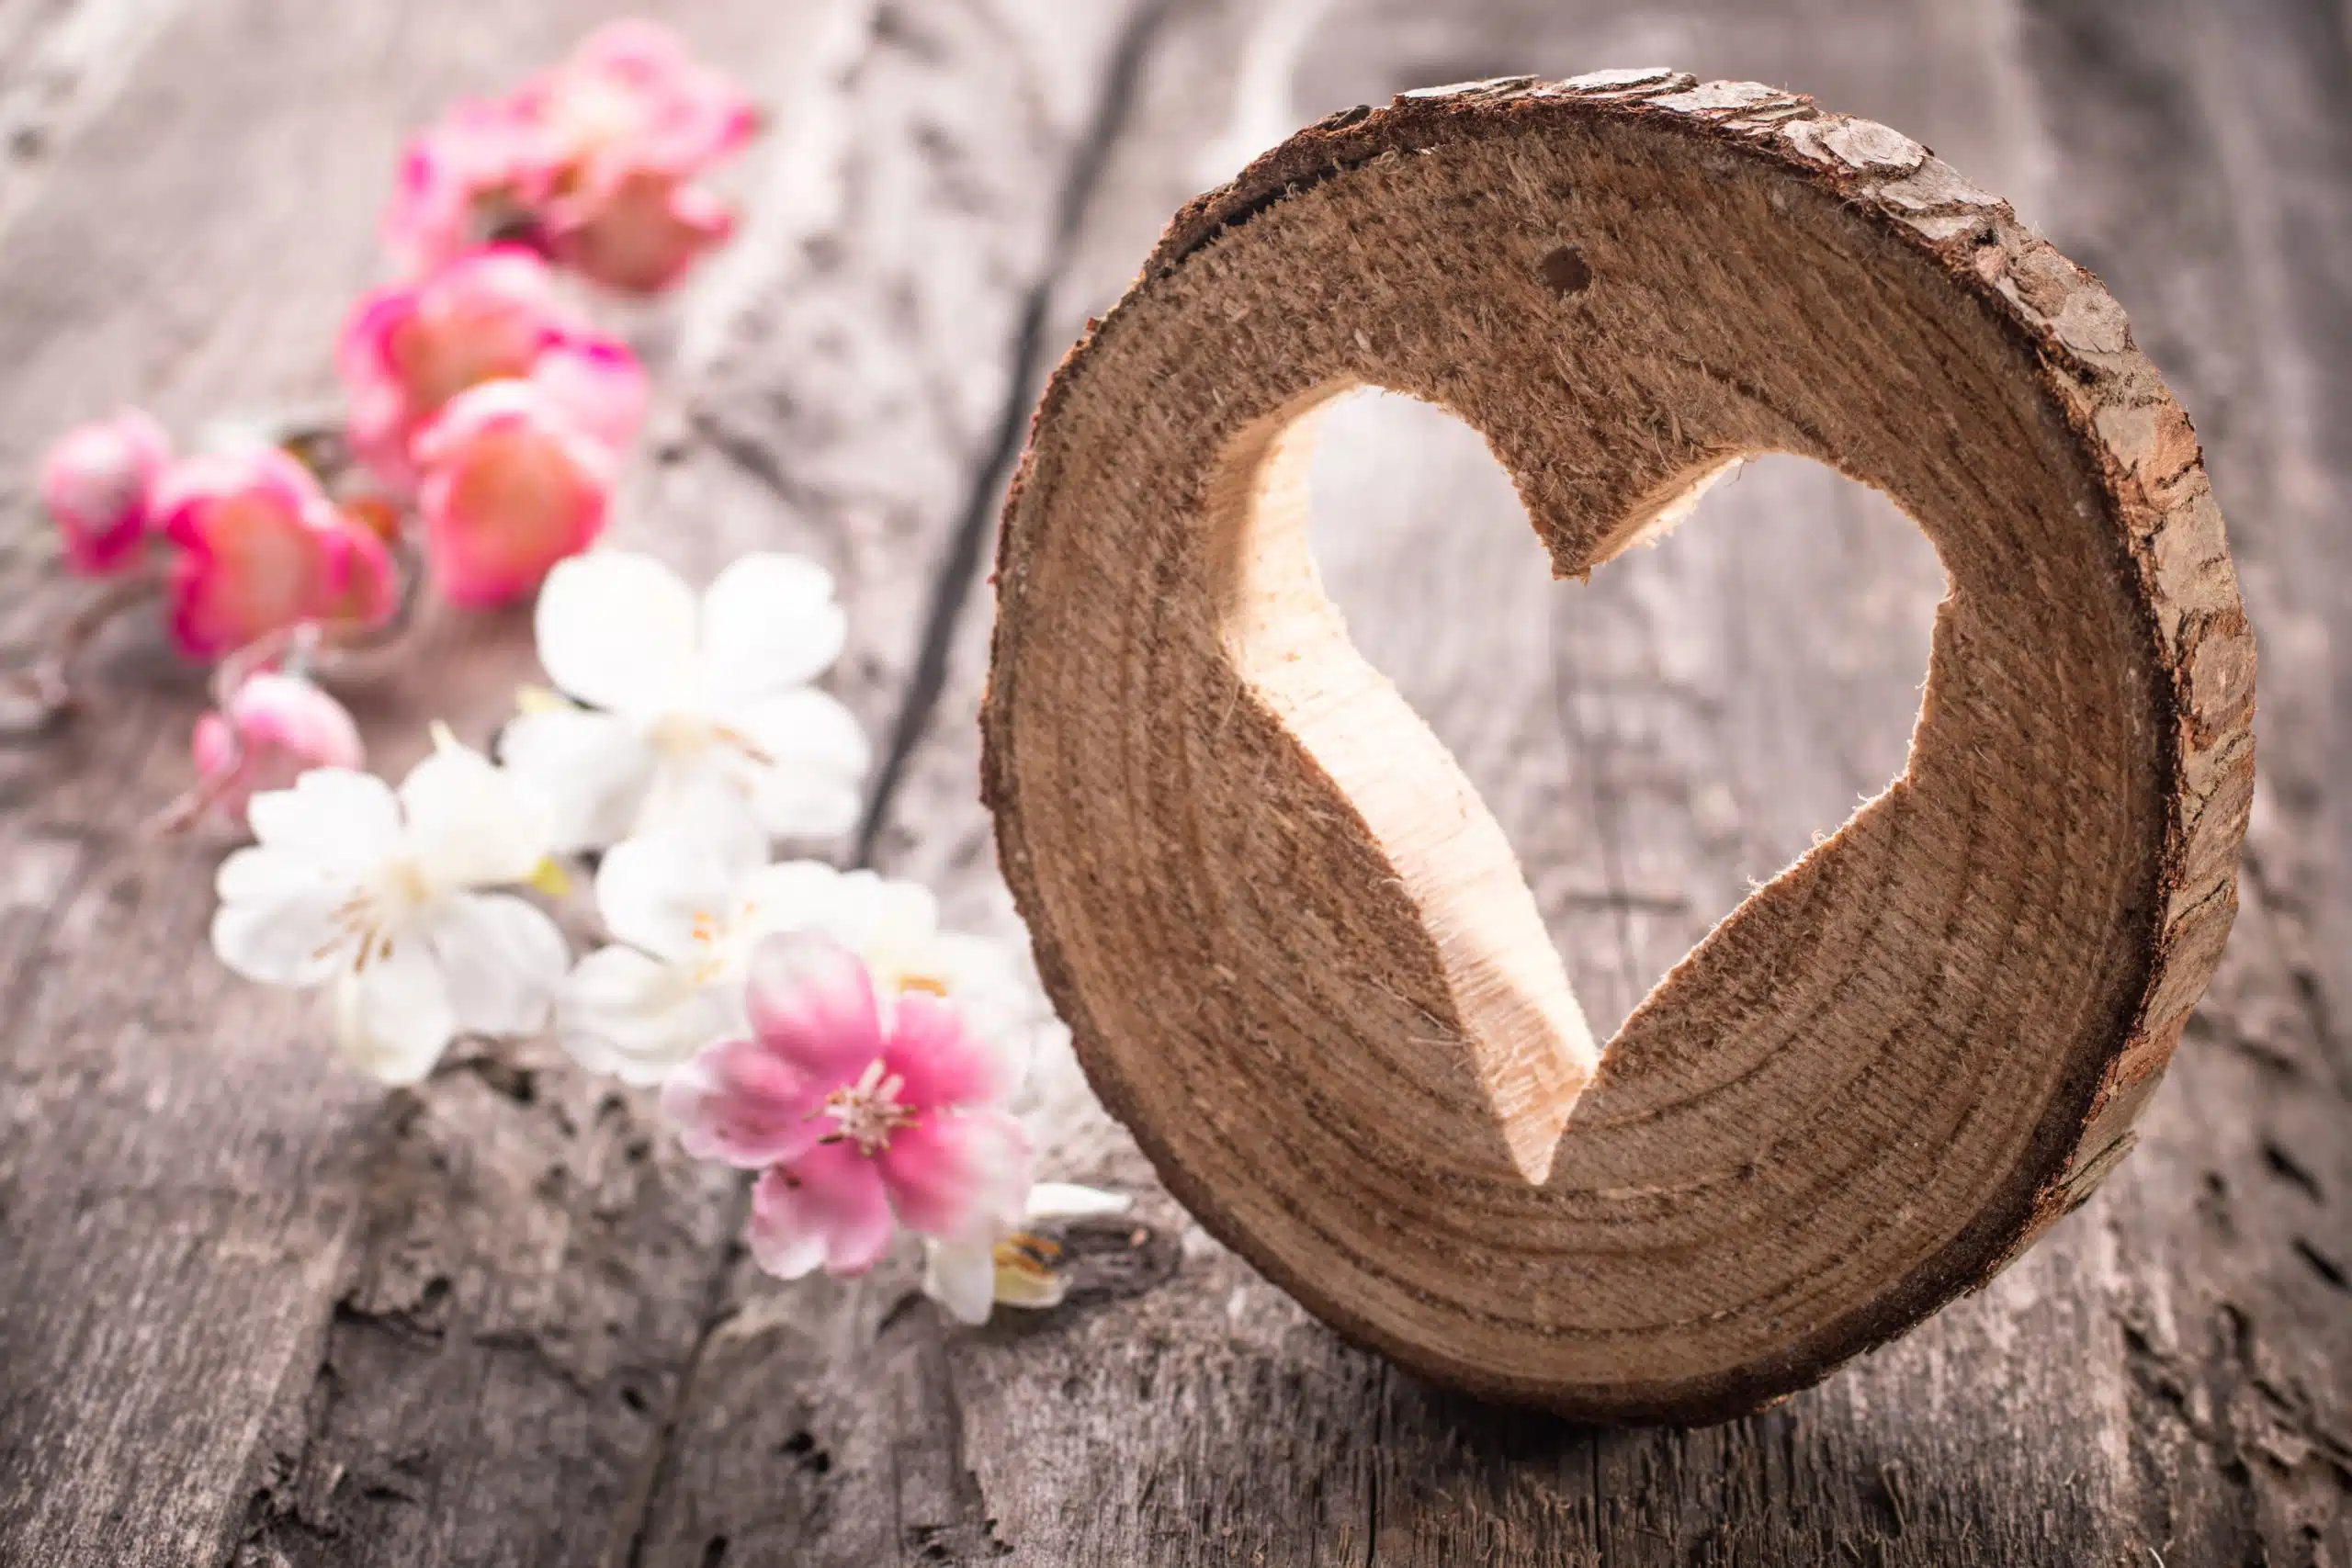 Heart carved out from a round wood on rustic wooden table with pink flowers.